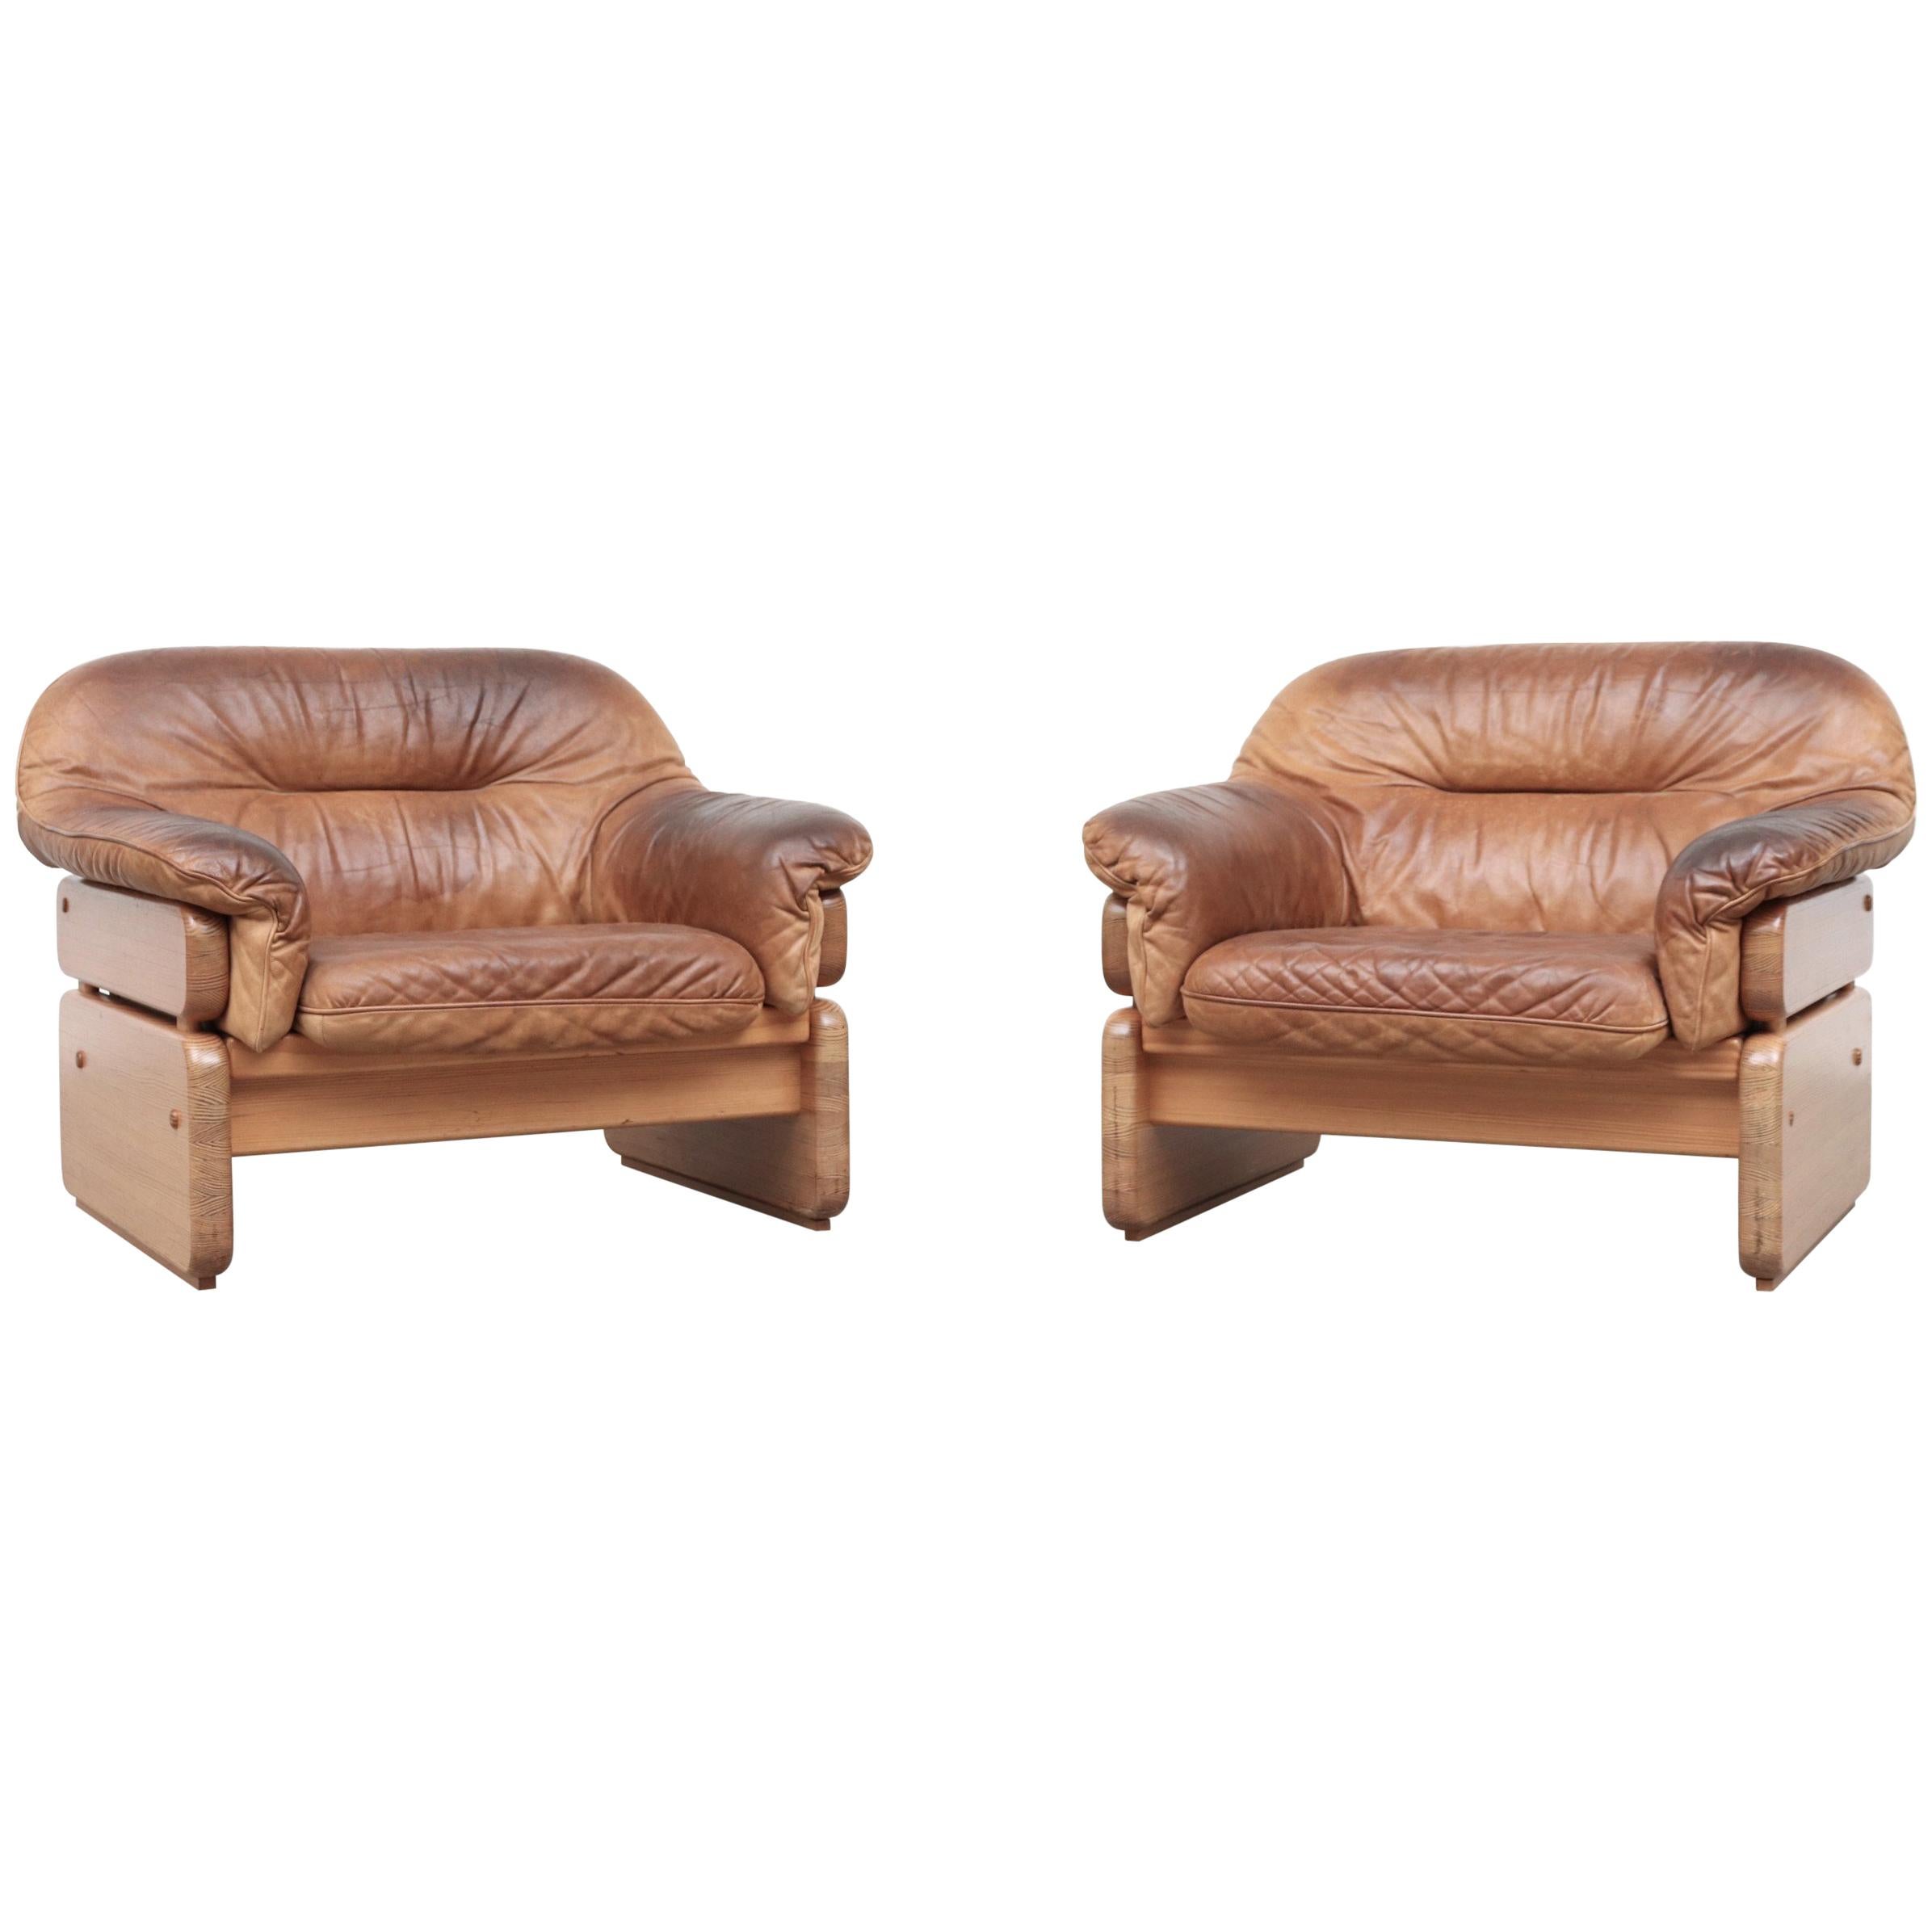 Pair of Gerard Van Den Berg Inspired Pine and Leather Lounge Chairs